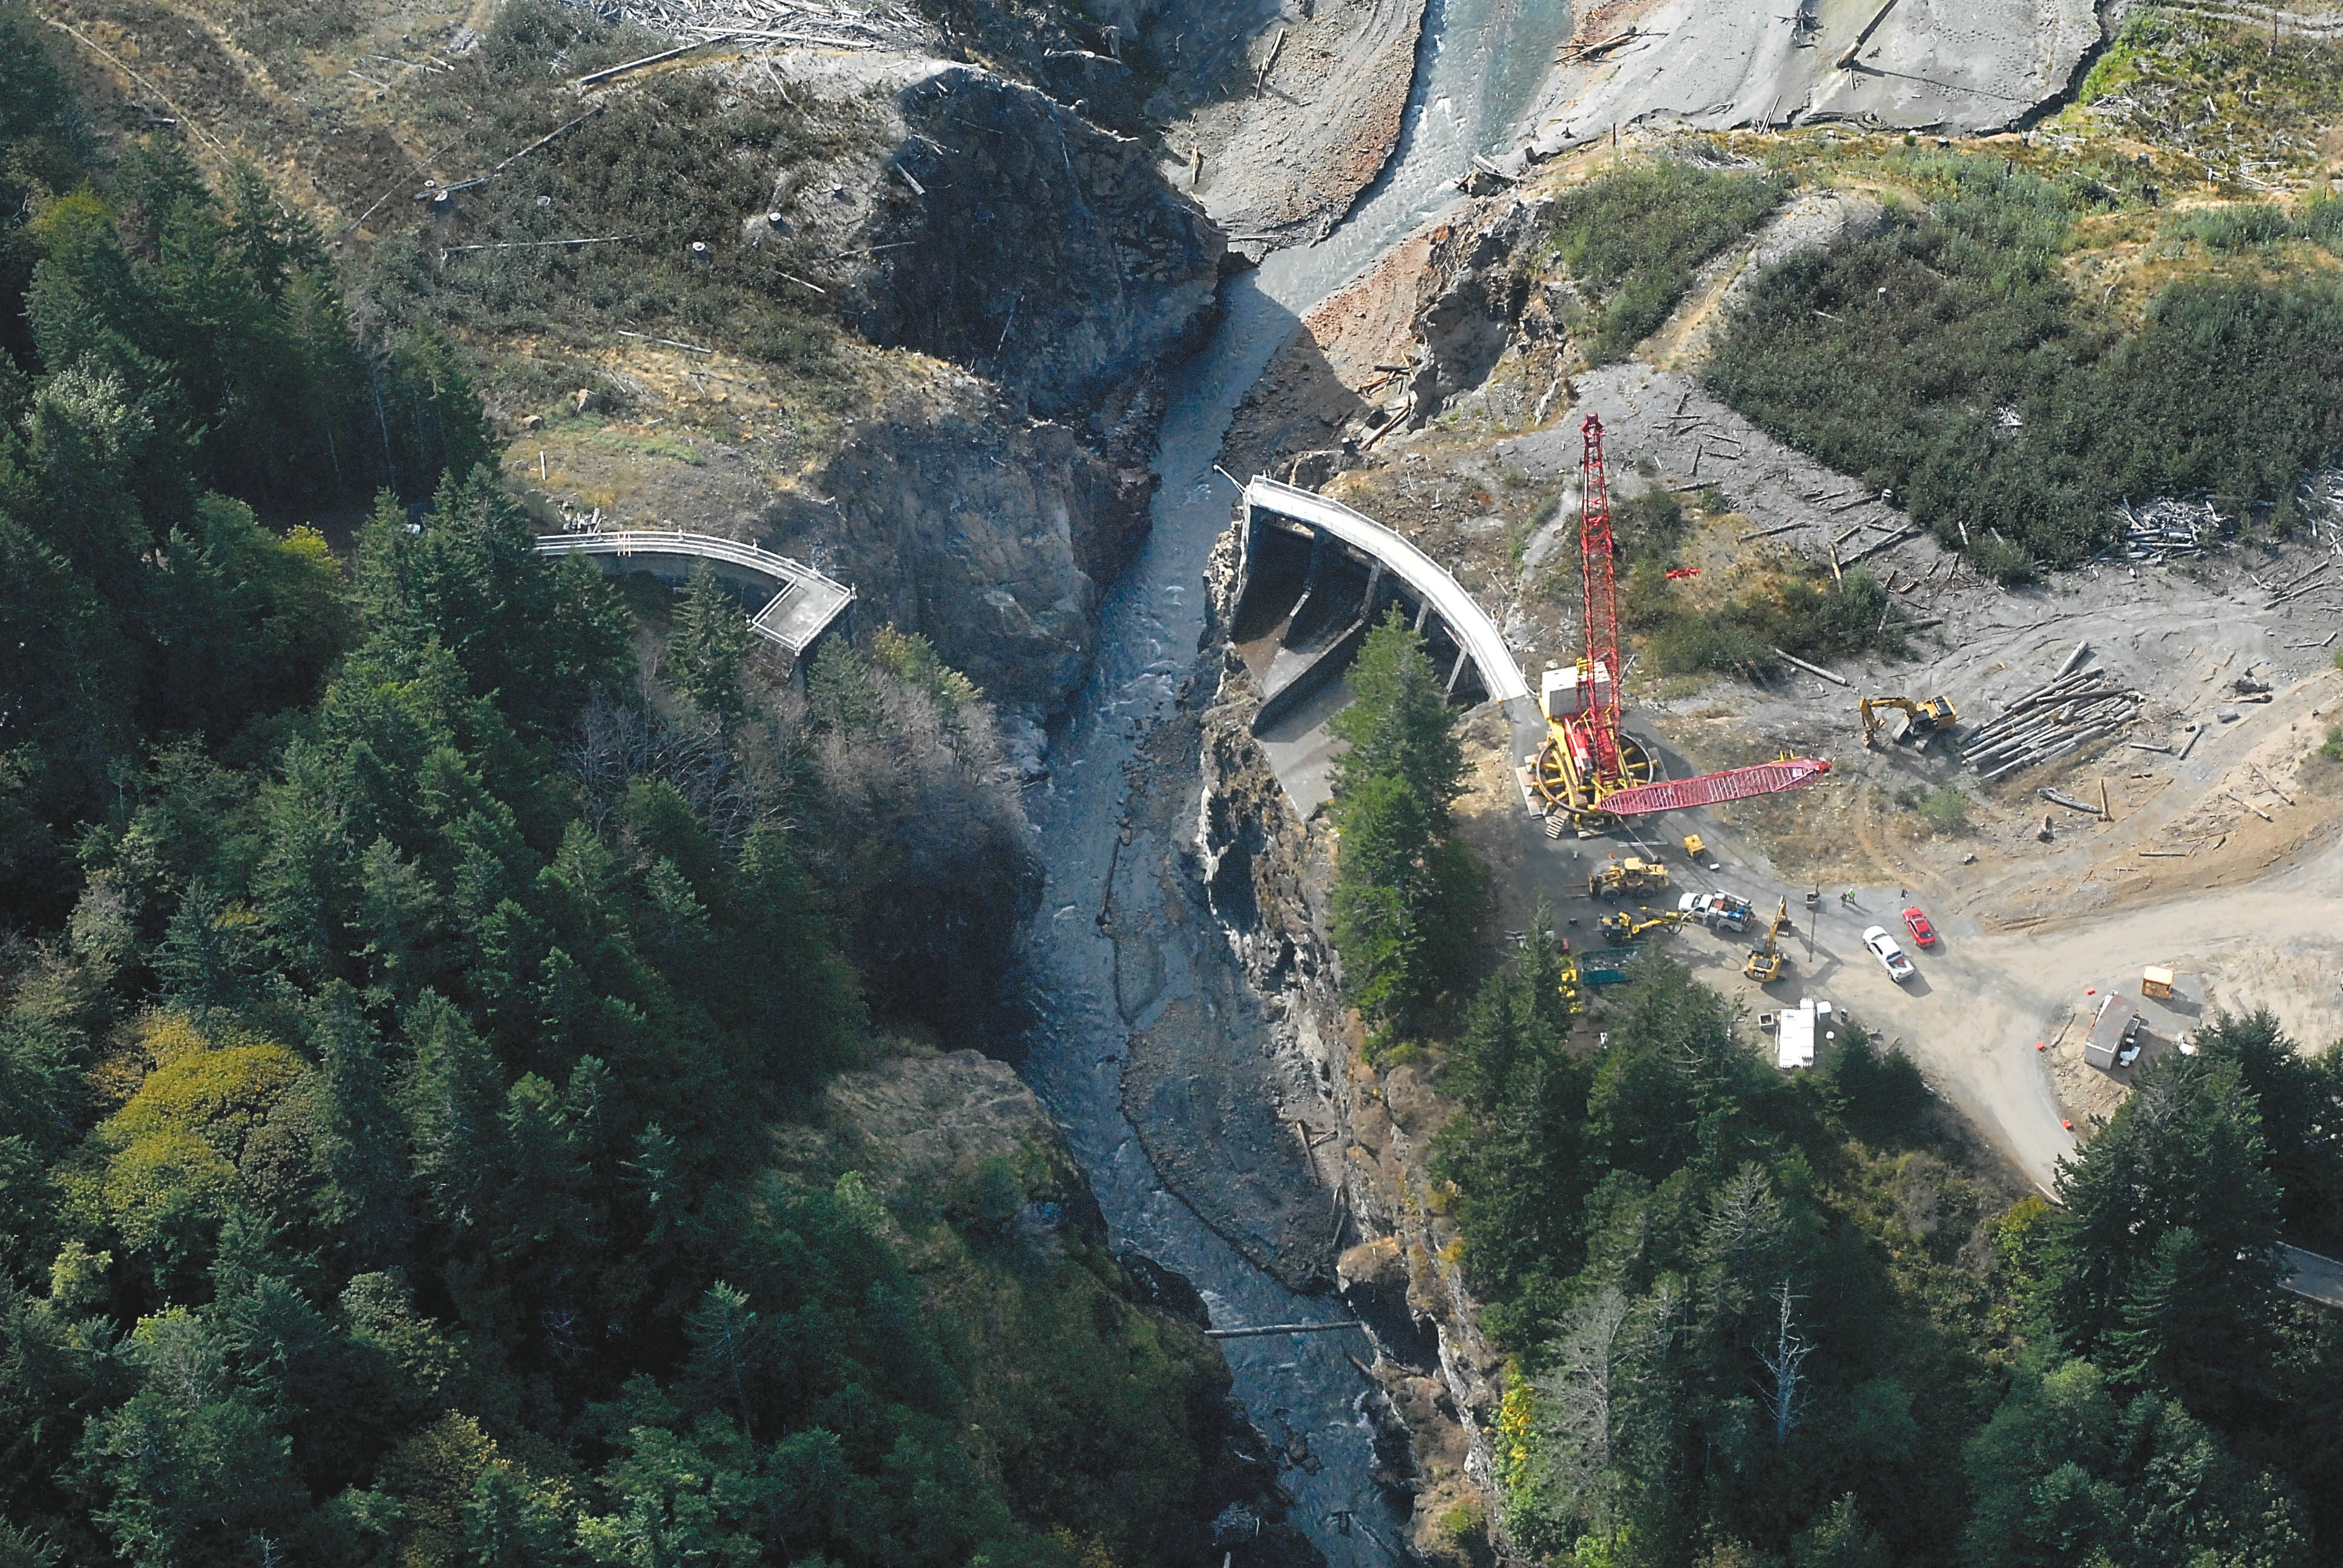 The Elwha River passes through what was once Glines Canyon Dam in this aerial photograph taken in Olympic National Park. Portions of the former dam